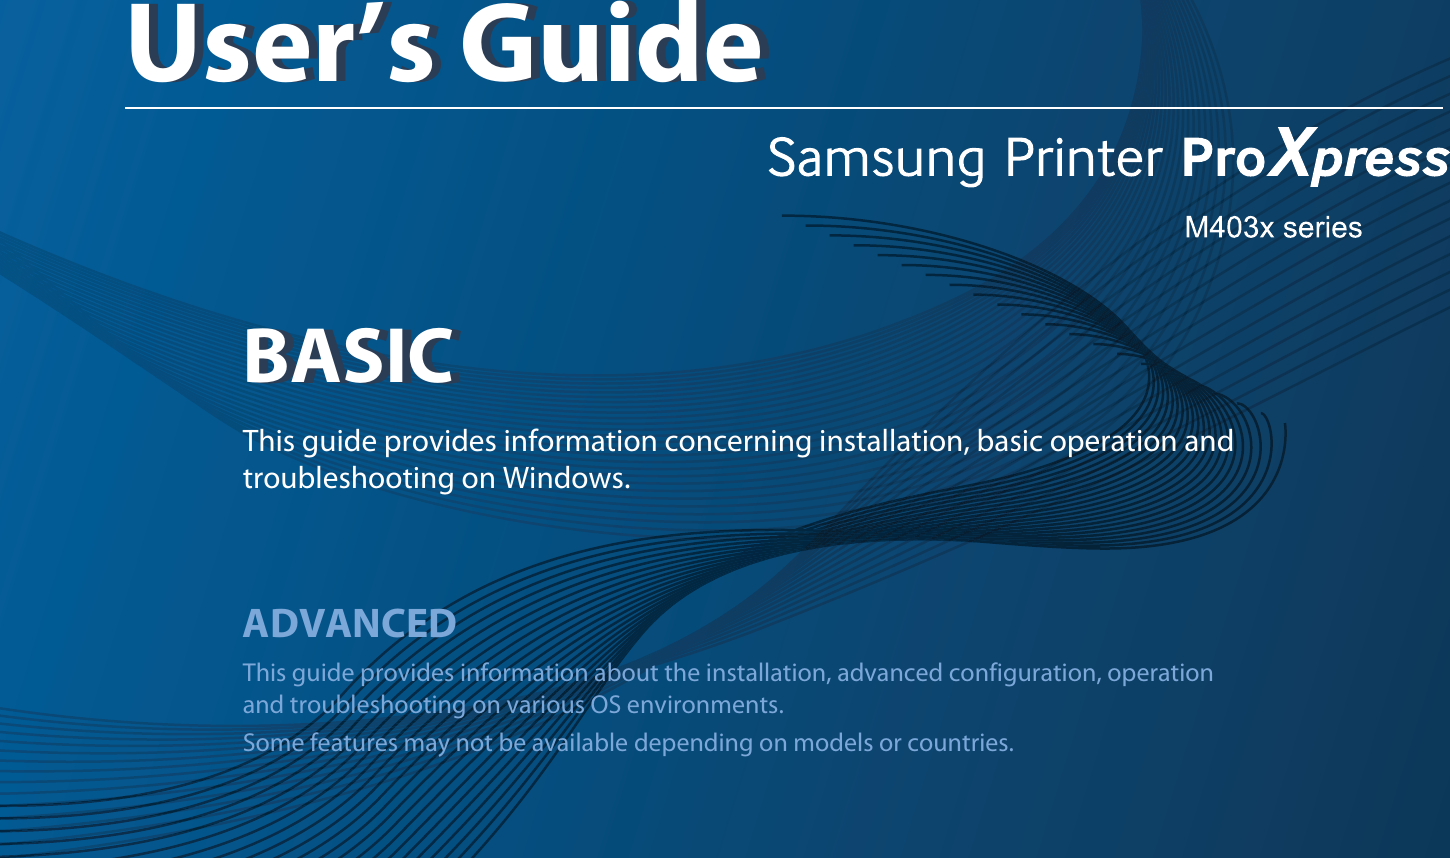 BASICUser’s GuideBASICUser’s GuideThis guide provides information concerning installation, basic operation and troubleshooting on Windows.ADVANCEDThis guide provides information about the installation, advanced configuration, operation and troubleshooting on various OS environments.Some features may not be available depending on models or countries.